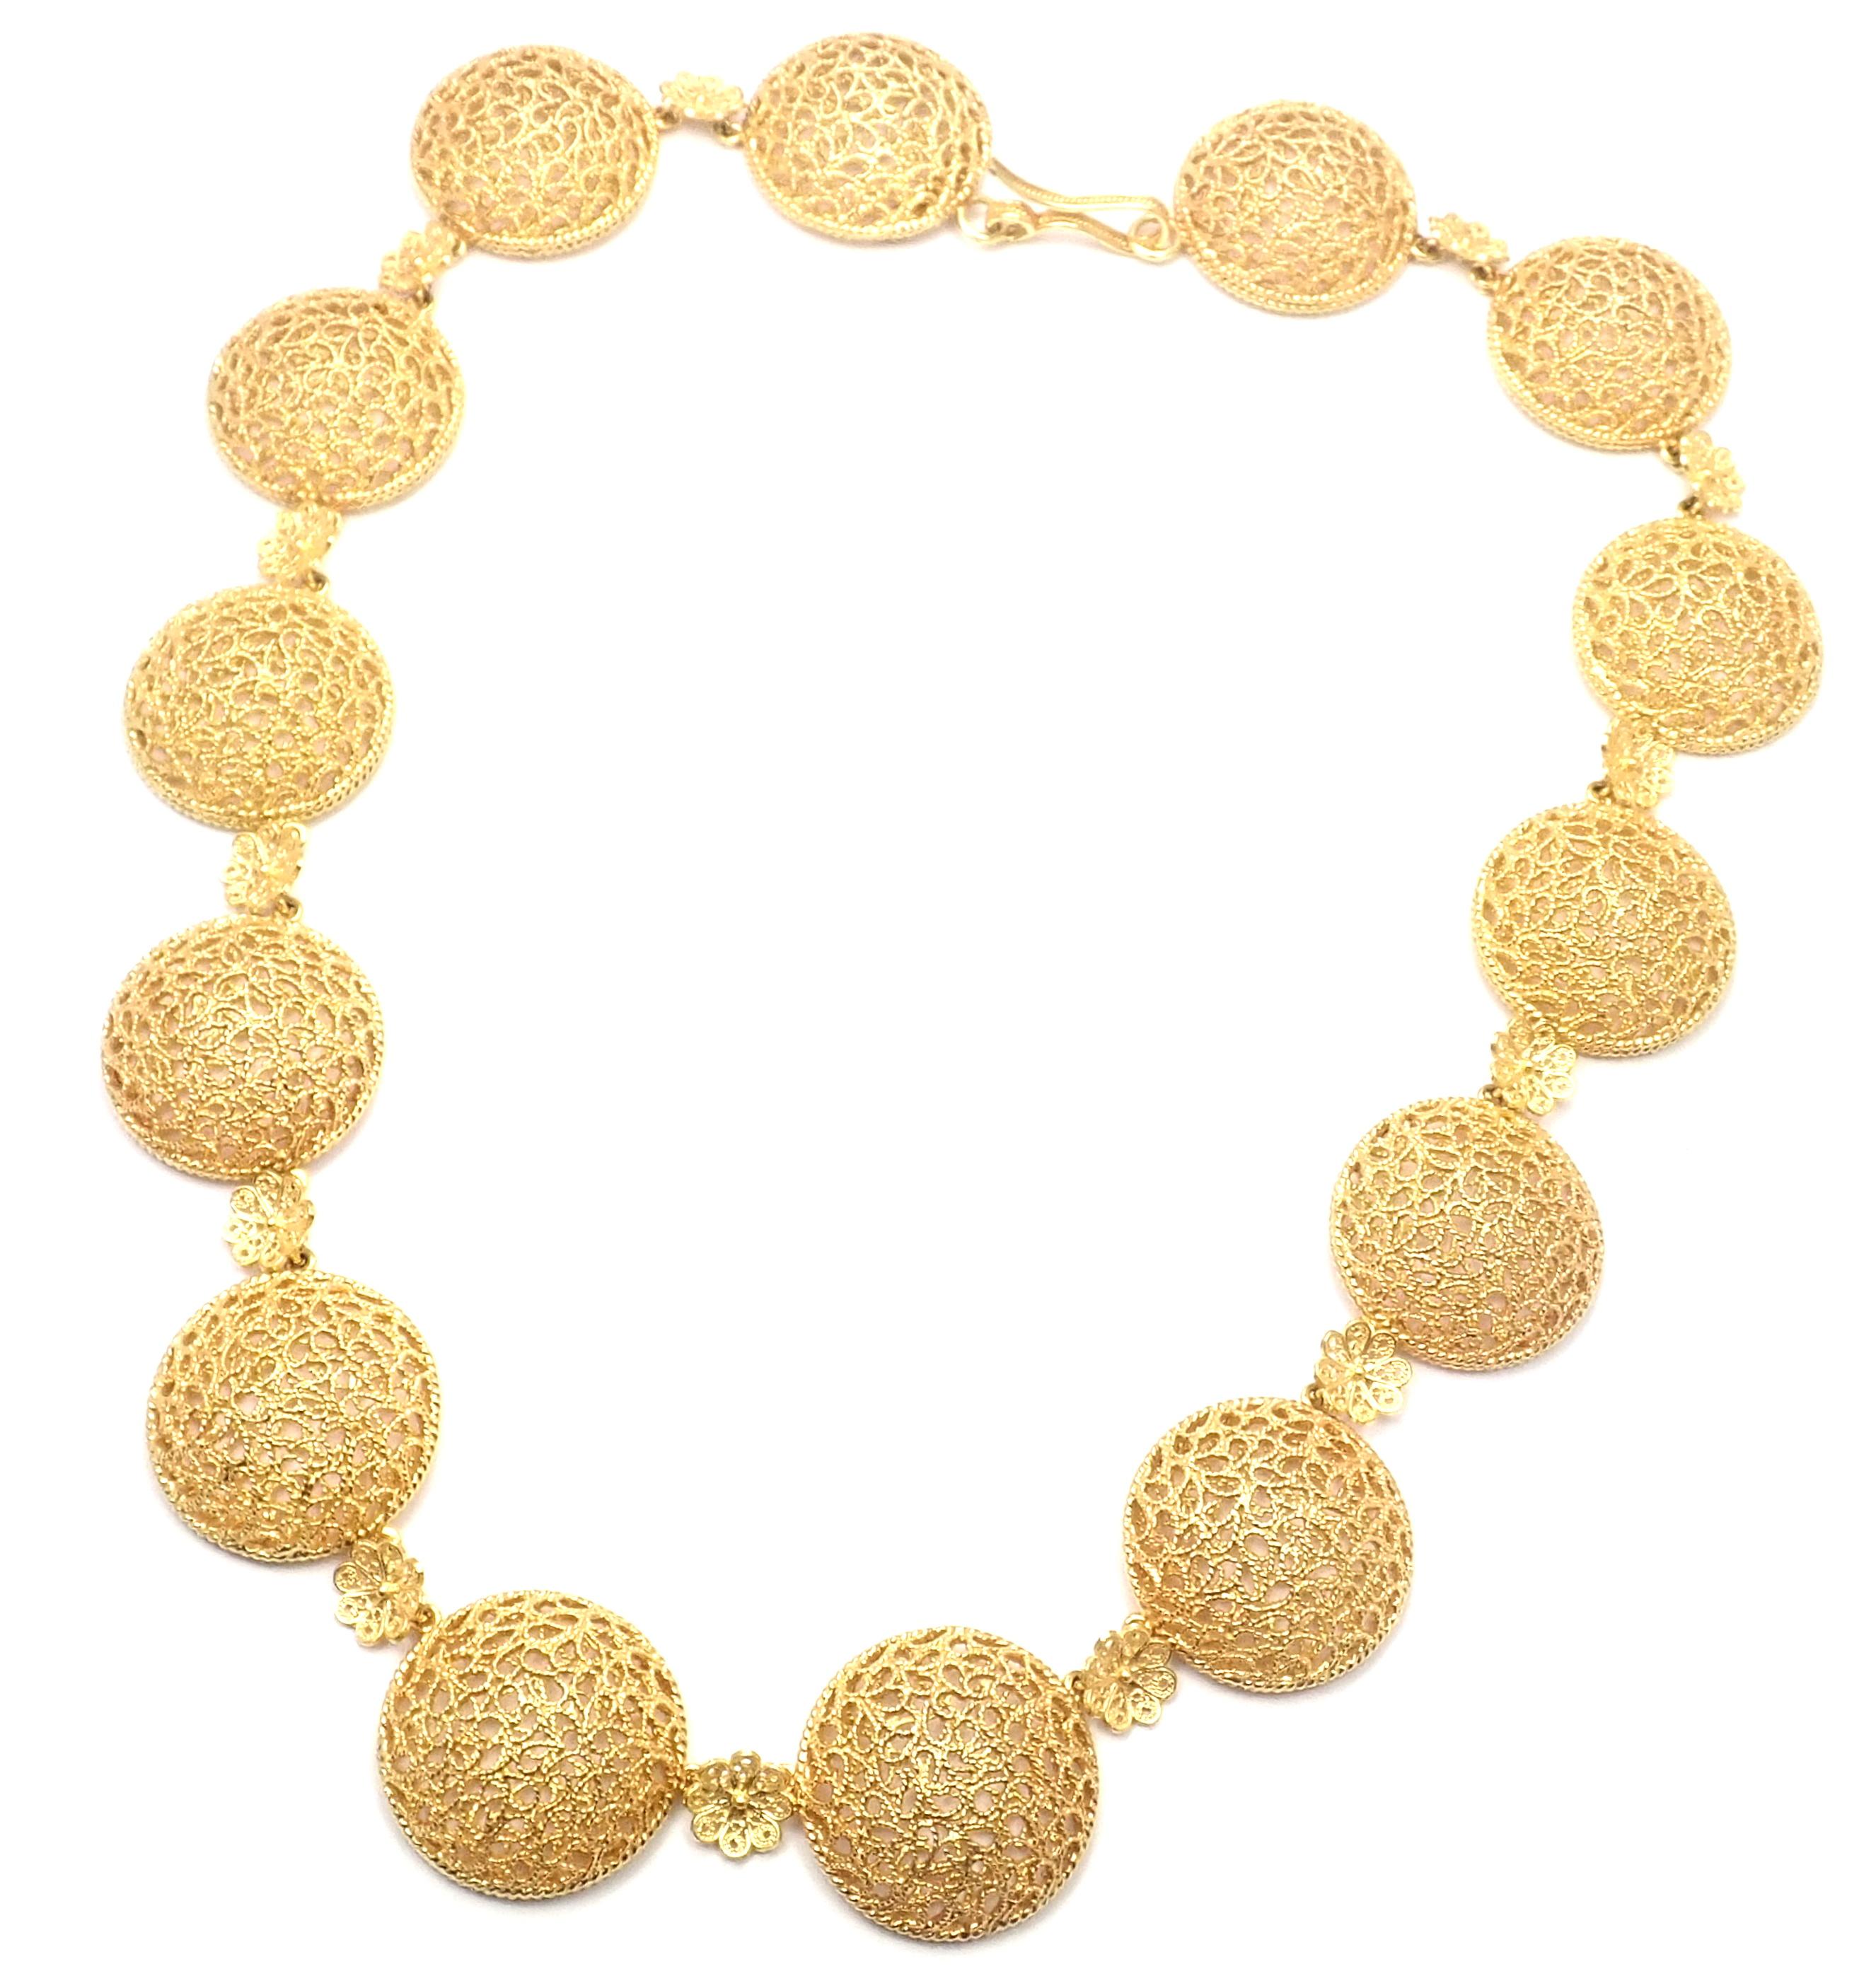 18k Yellow Gold Filidoro Link Necklace by Buccellati. 
Details: 
Weight: 71 grams
Length: 17